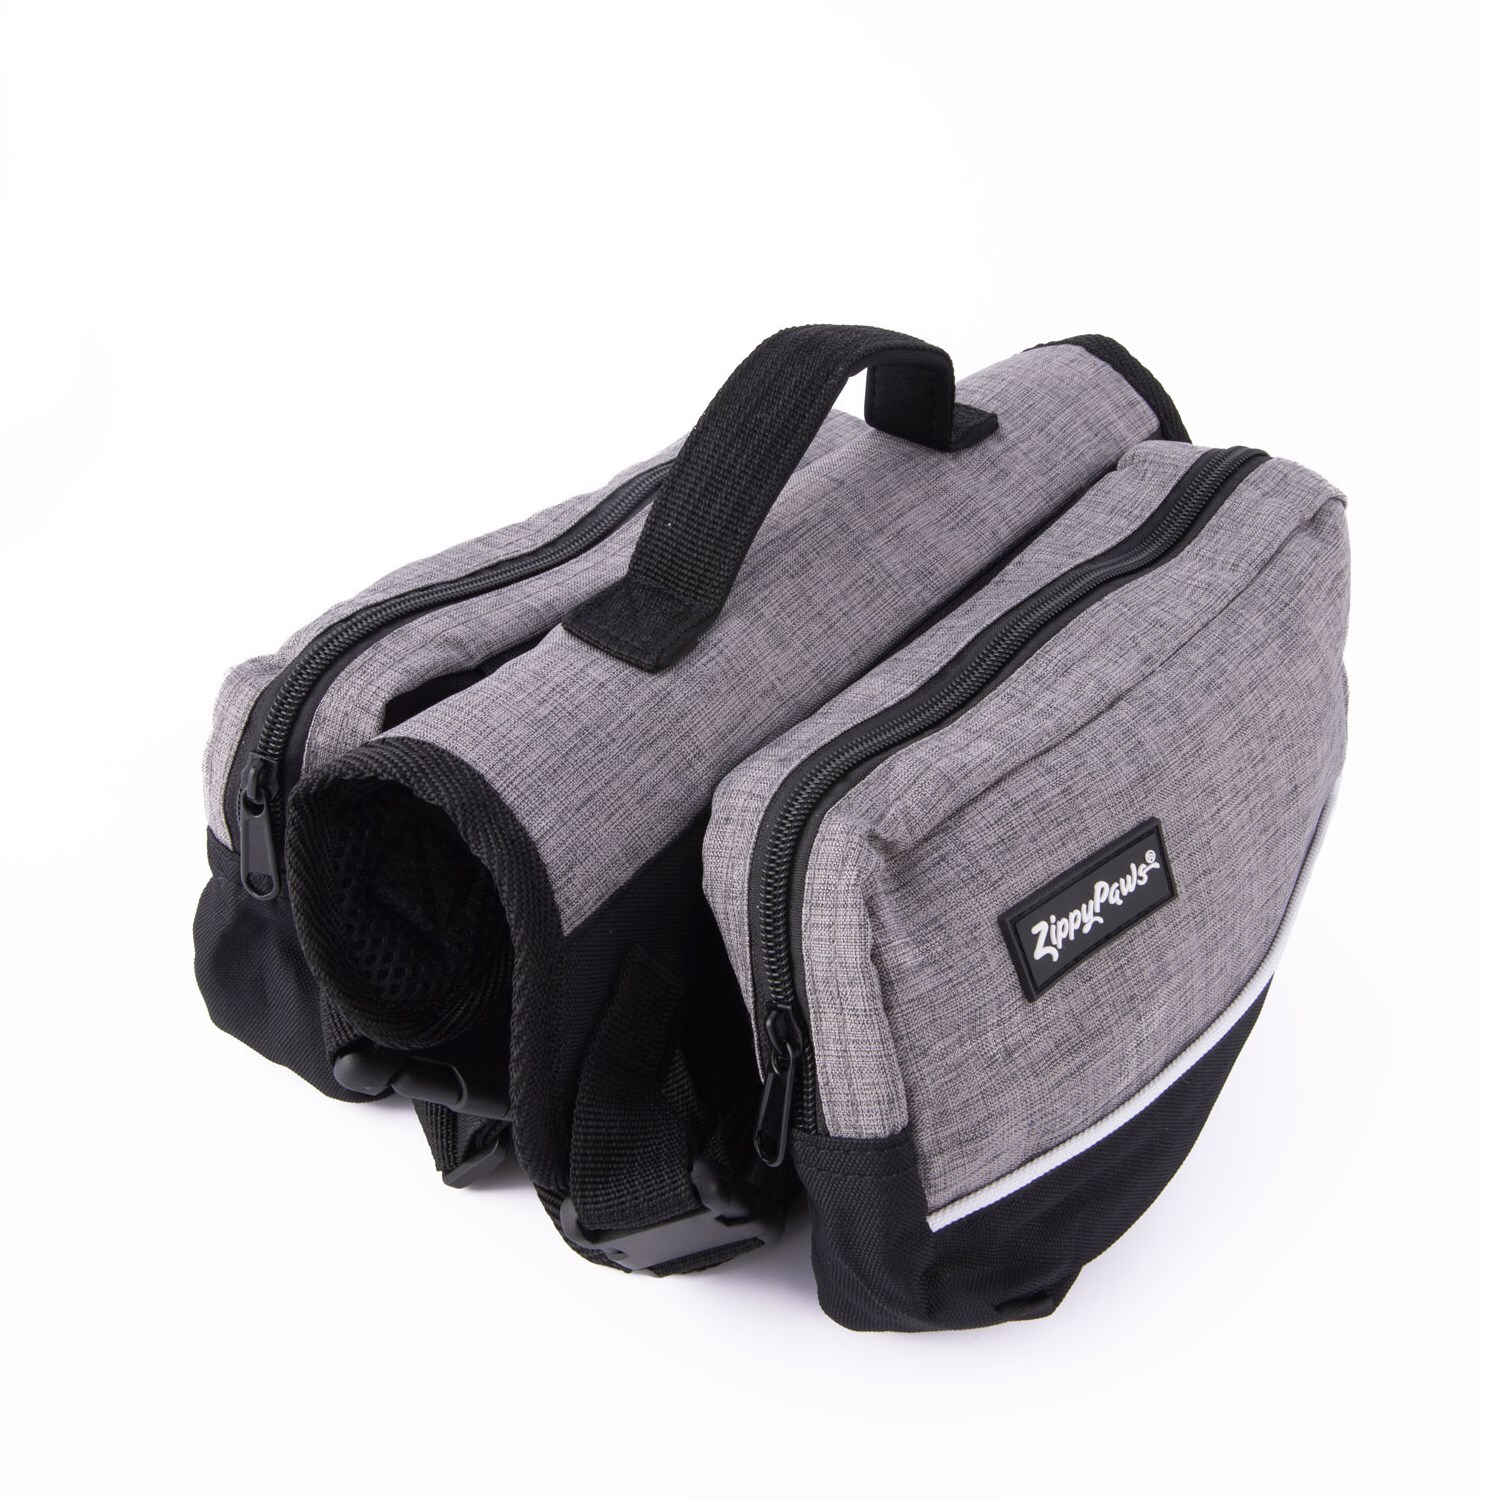 Zippy Paws Dog Backpack in Graphite Grey image 1